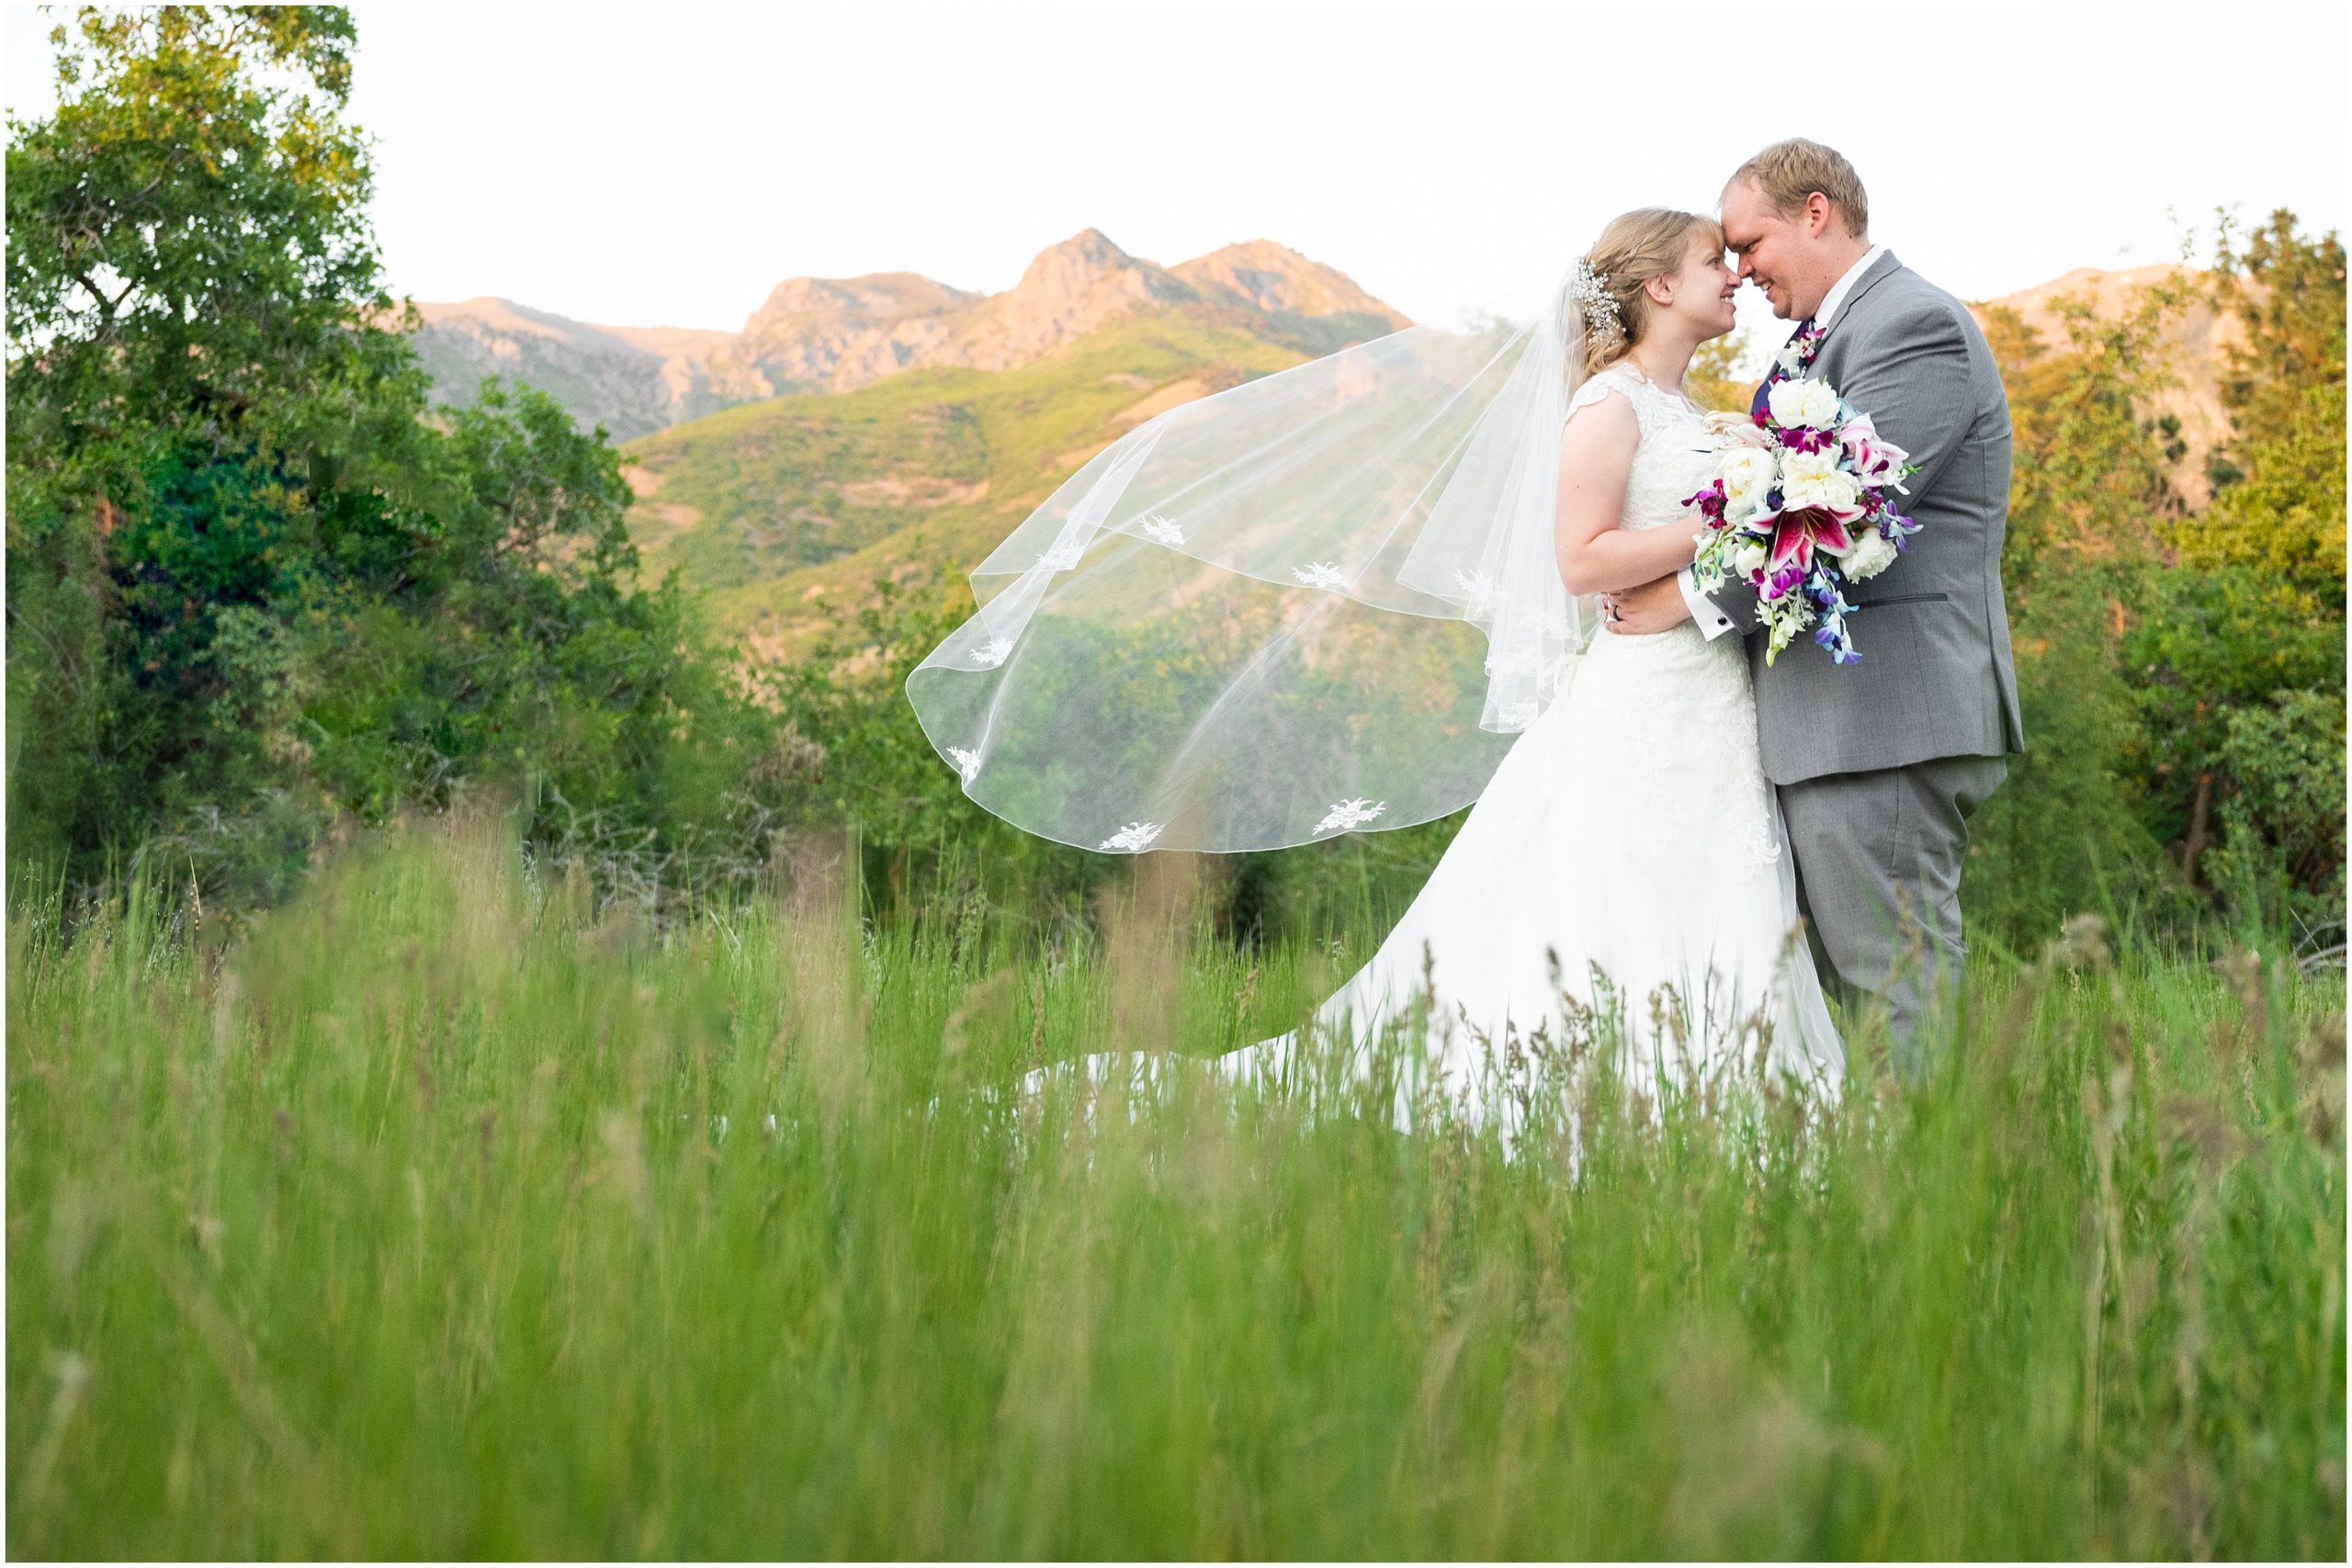 Bride and groom portraits in from of trees and mountains | Orchid Inspired Summer Wedding at Oak Hills Utah | Jessie and Dallin Photography